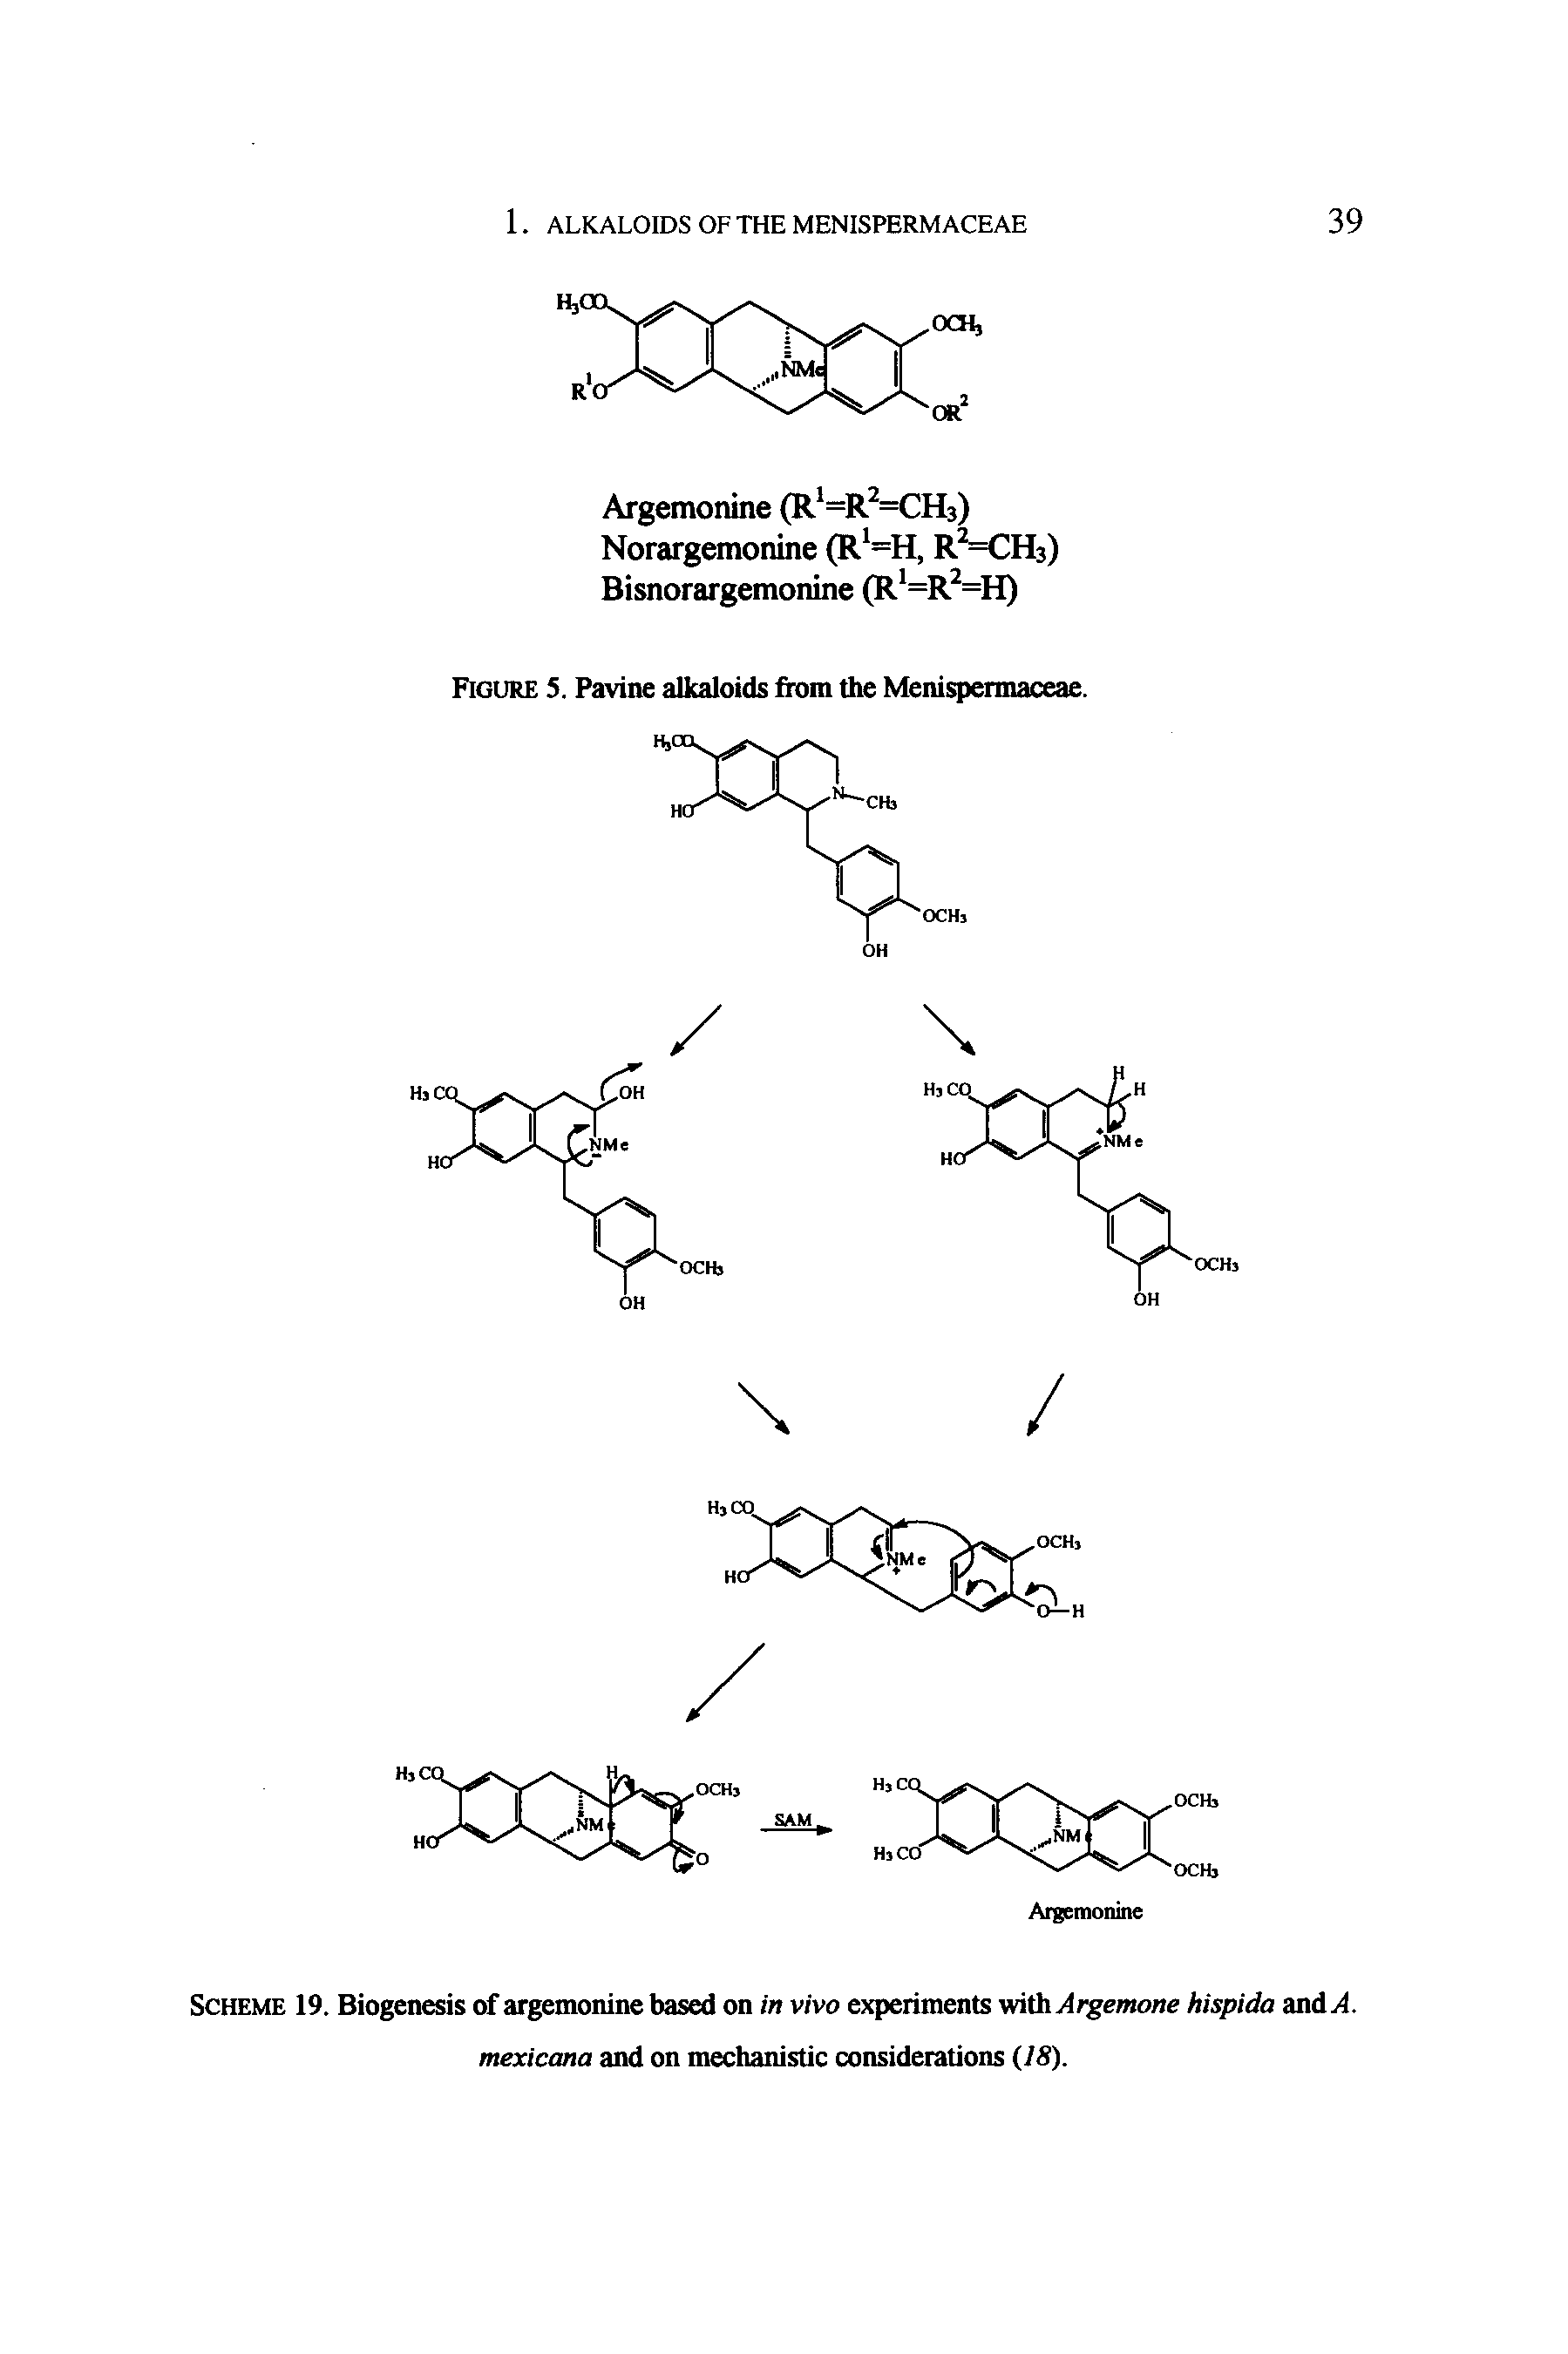 Scheme 19. Biogenesis of argemonine based on in vivo experiments v/ithArgemone hispida and. mexicana and on mechanistic considerations (78).